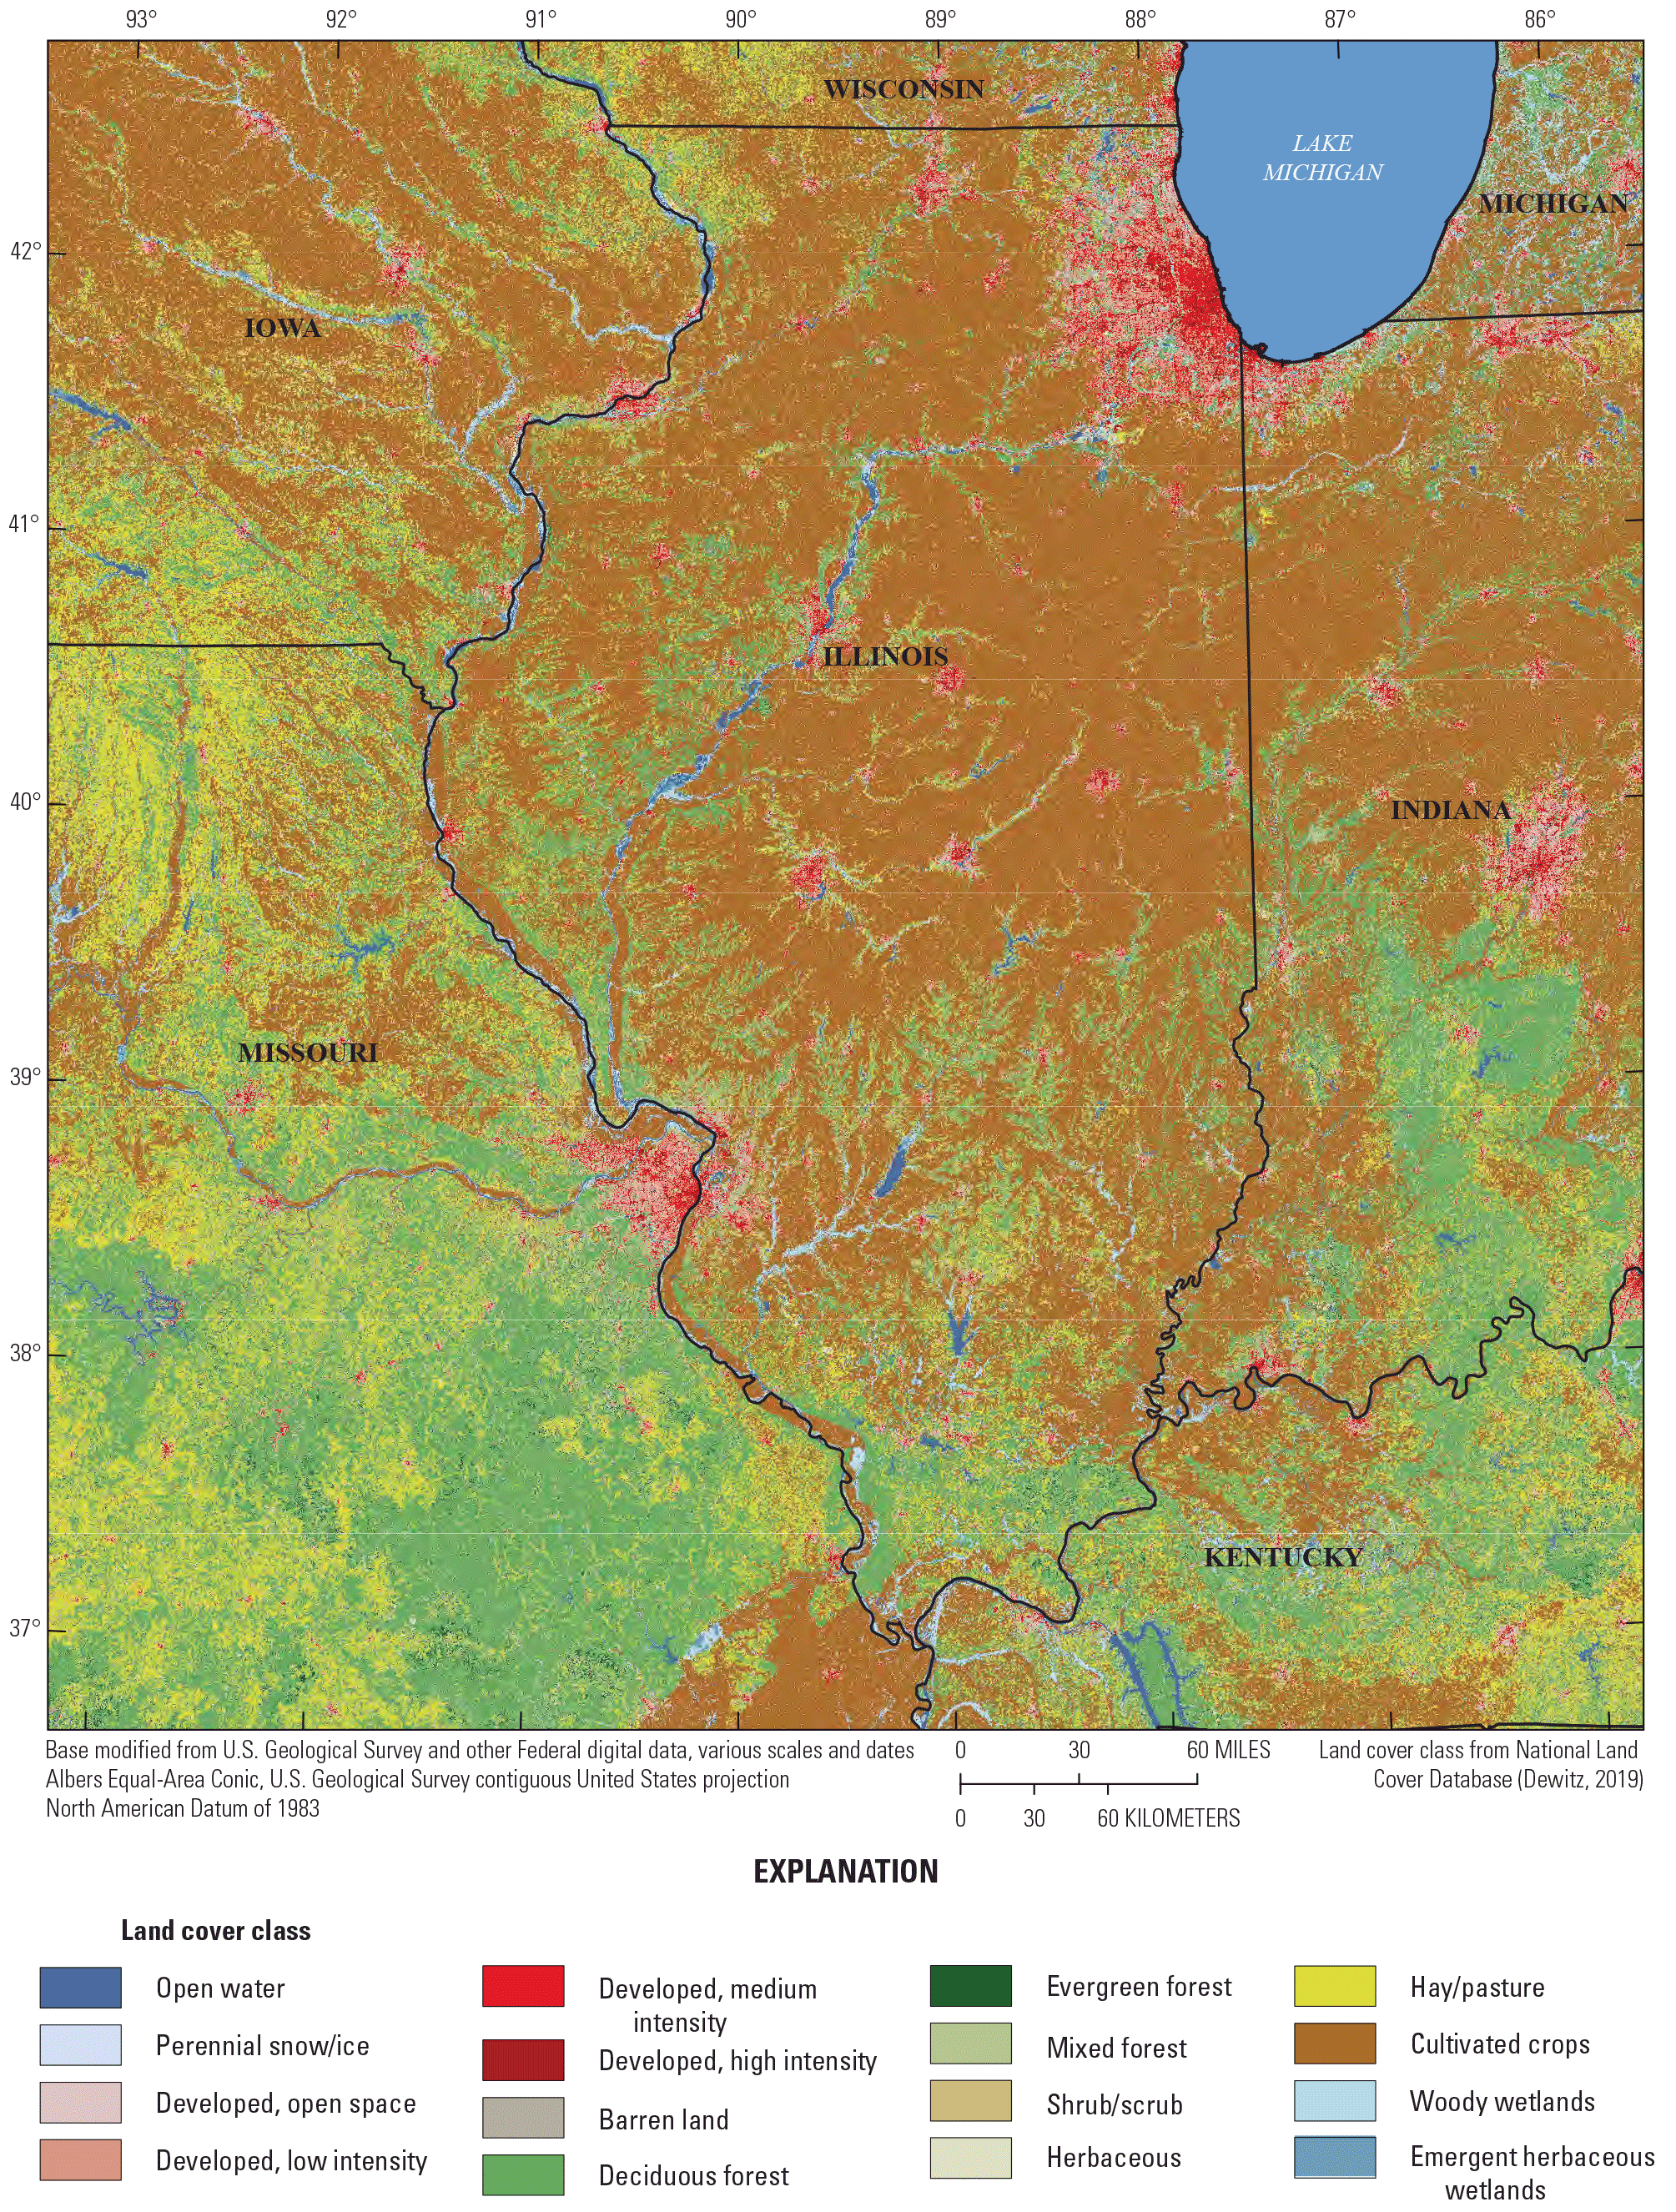 Land cover in Illinois. Most of the state is covered in cultivated crops, with areas
                        of deciduous forest and developed land.